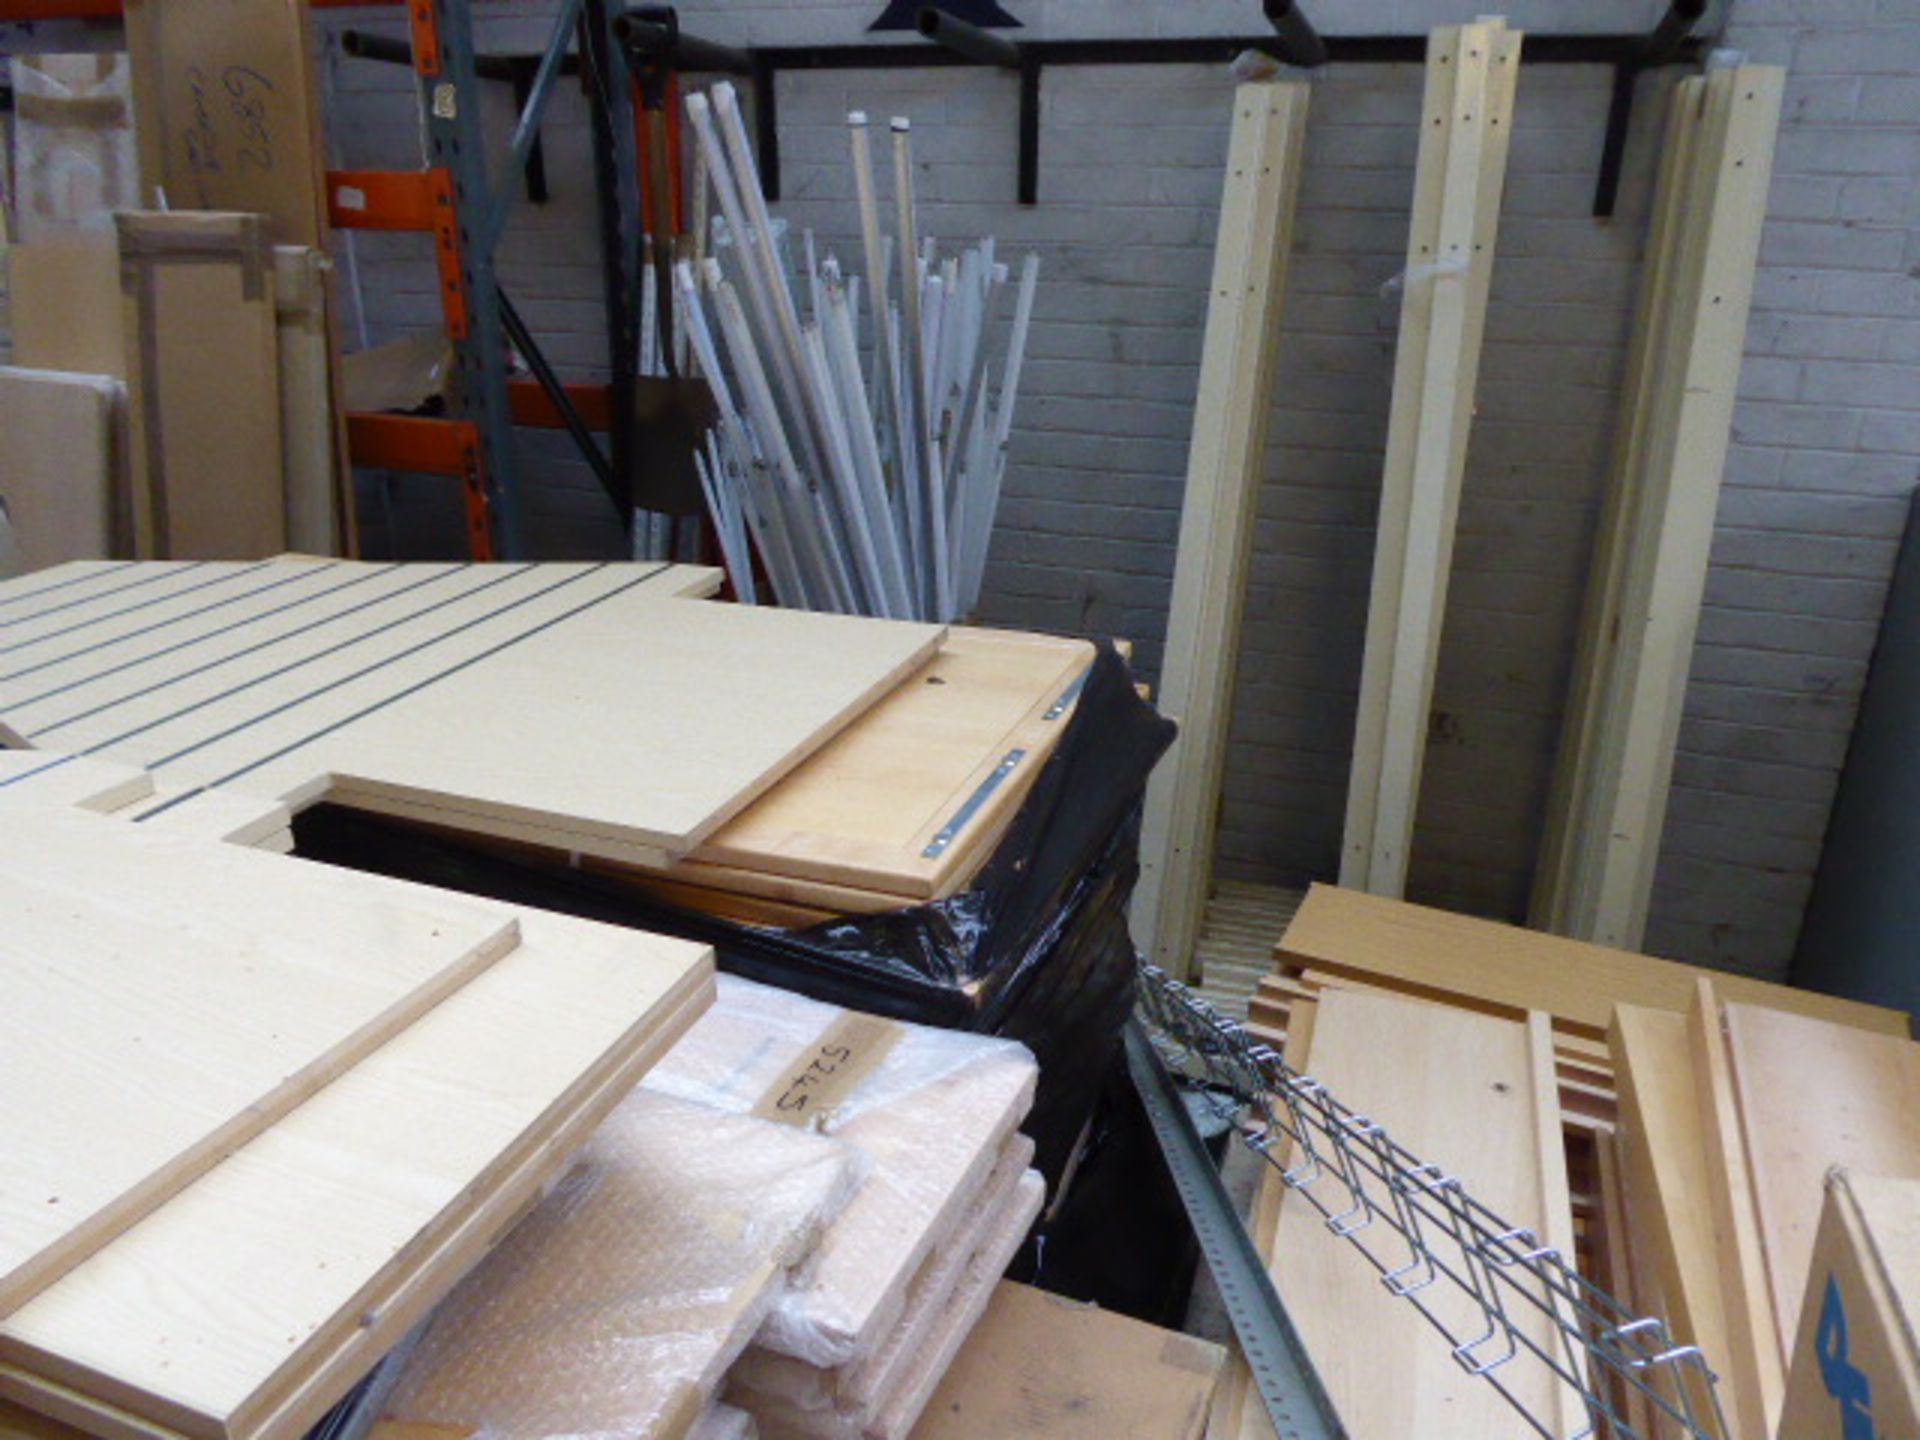 Large quantity of maple library style shelving and component parts. Includes approx. 6 pallets and a - Image 3 of 3